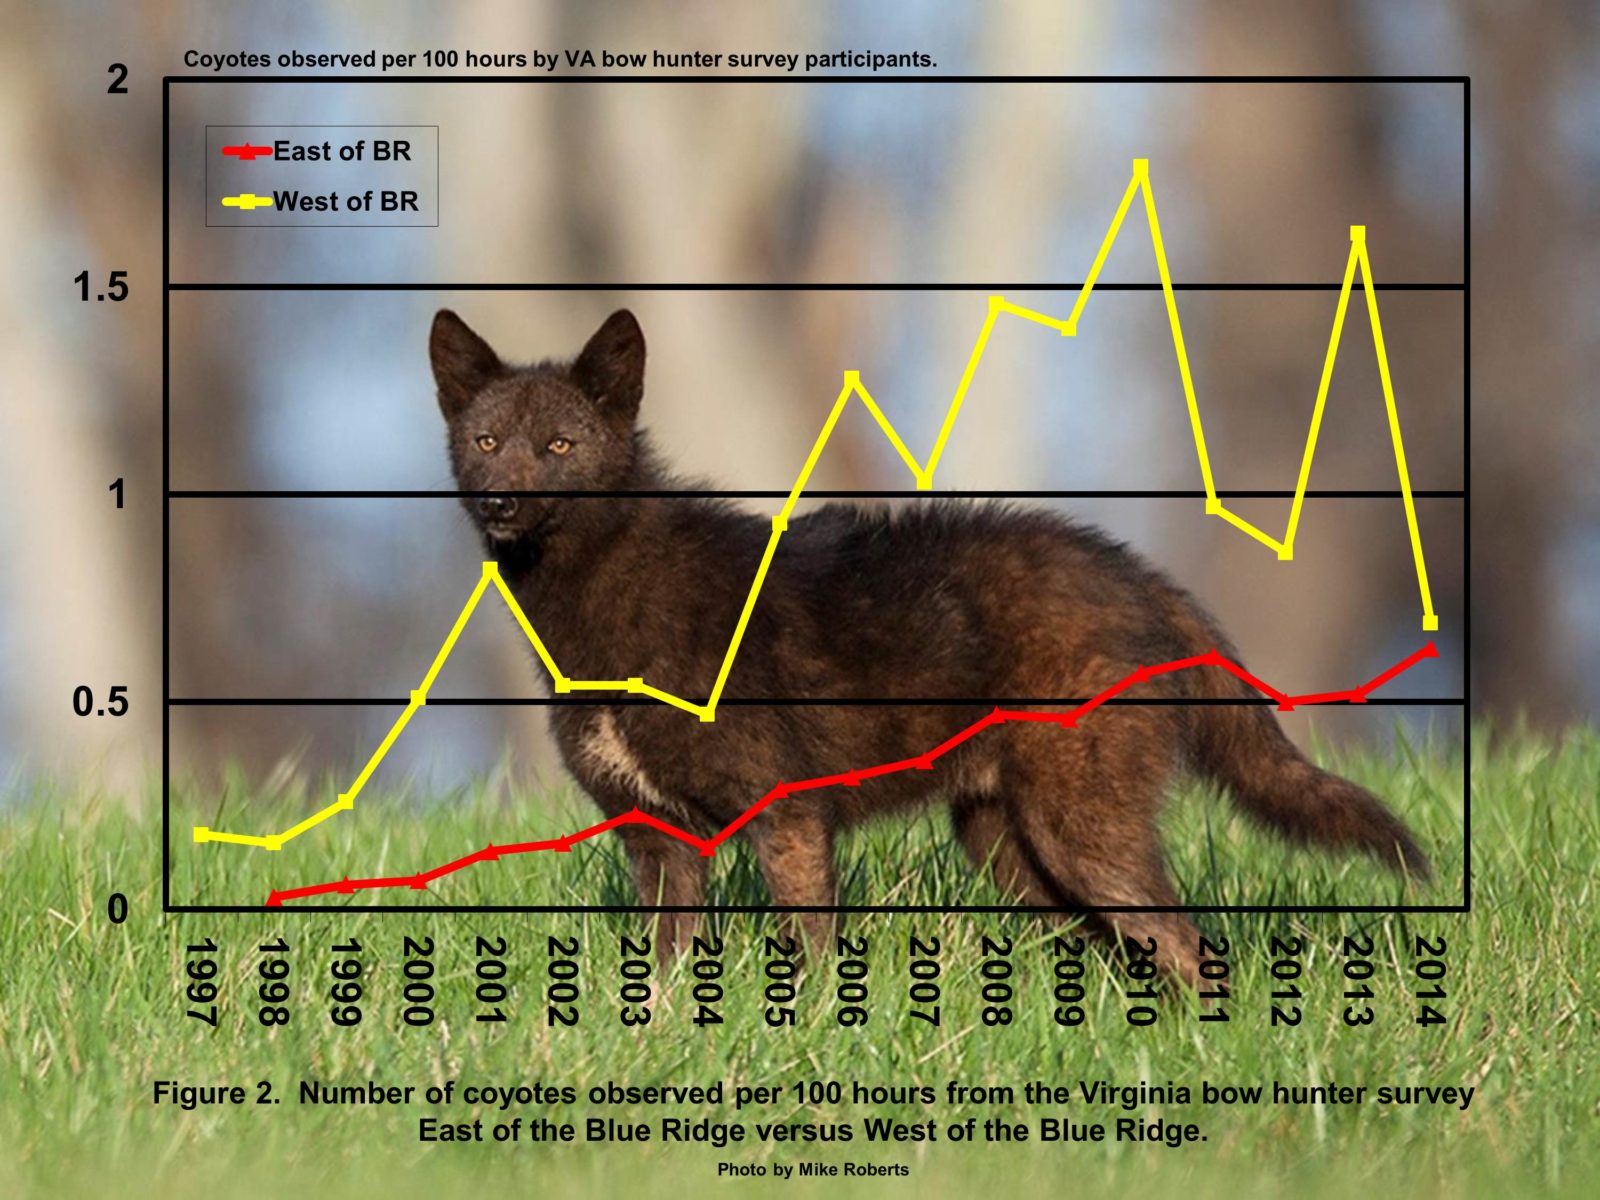 A graph of coyotes observed per 100 hours of hunting, it is rising steadily over time in East of Blue ridge but much more sporadically west of blue ridge